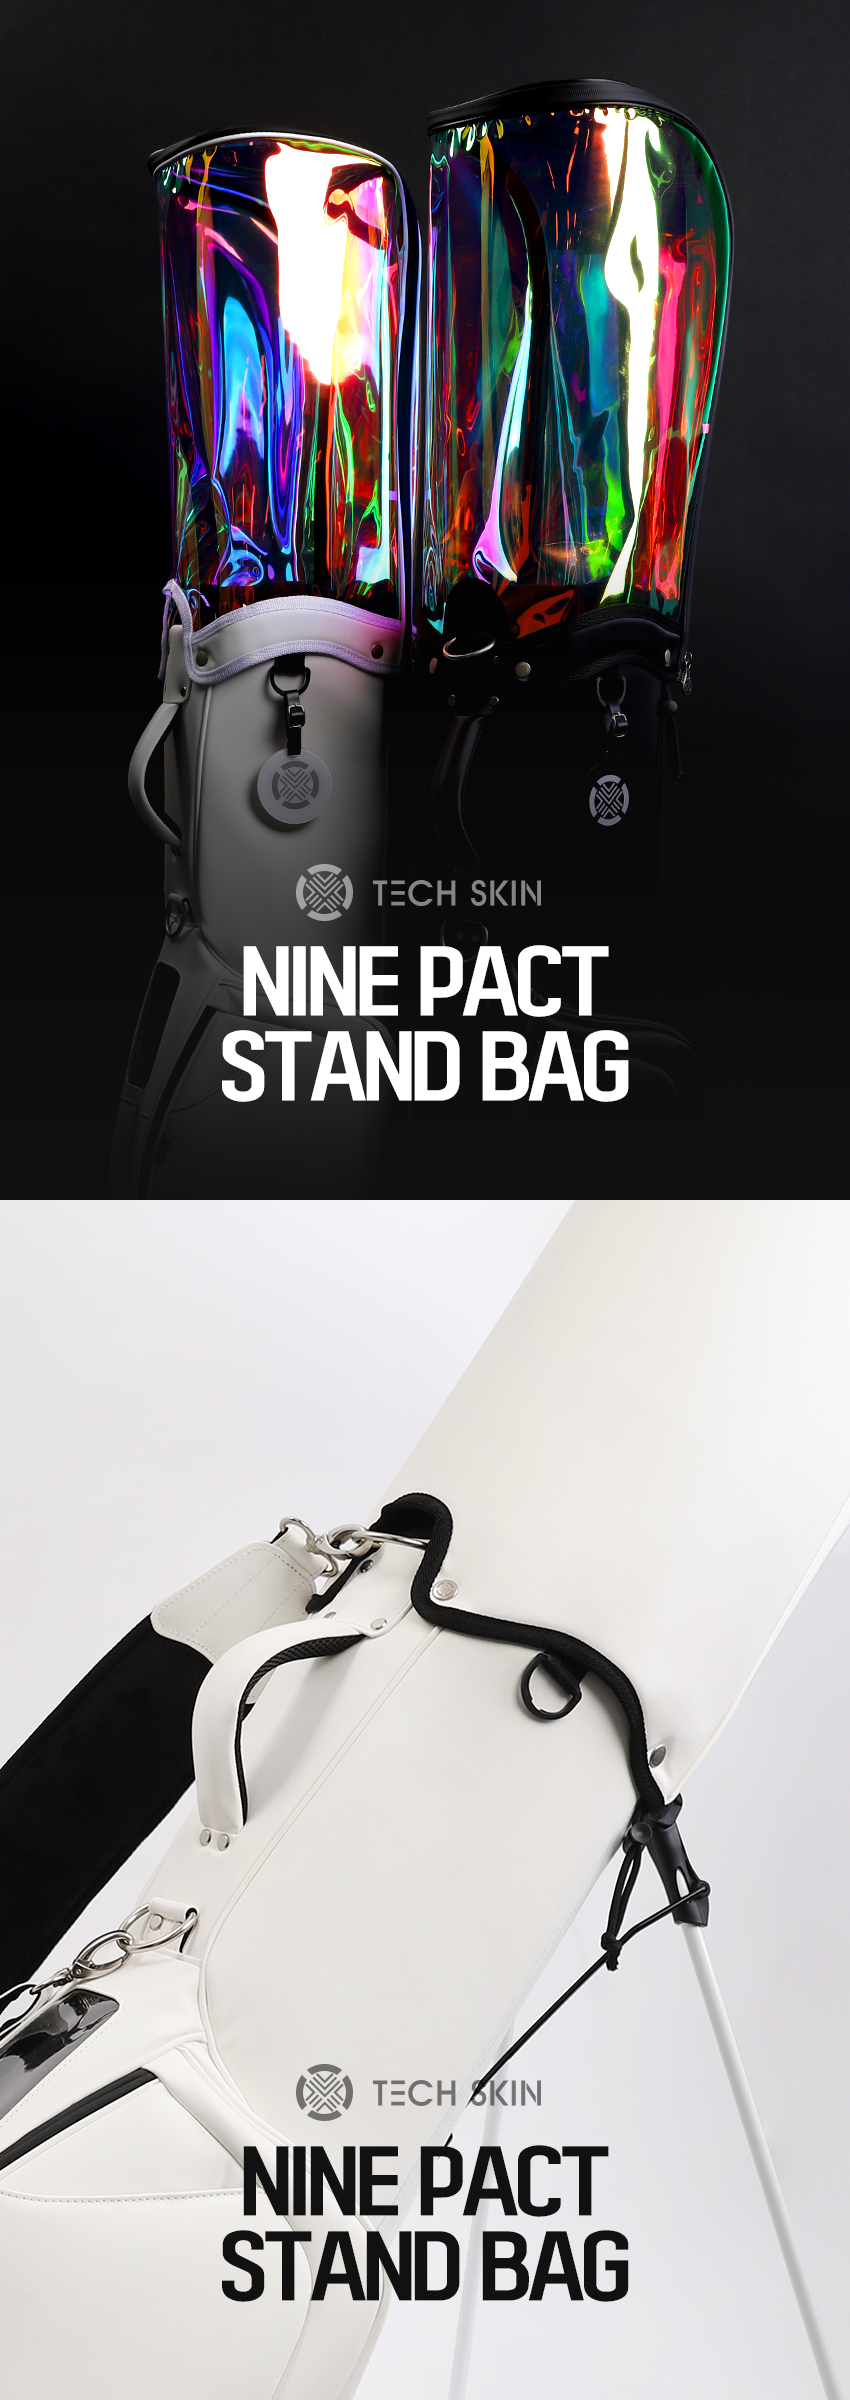 16315946279pact_stand_bag_detail_01.jpg